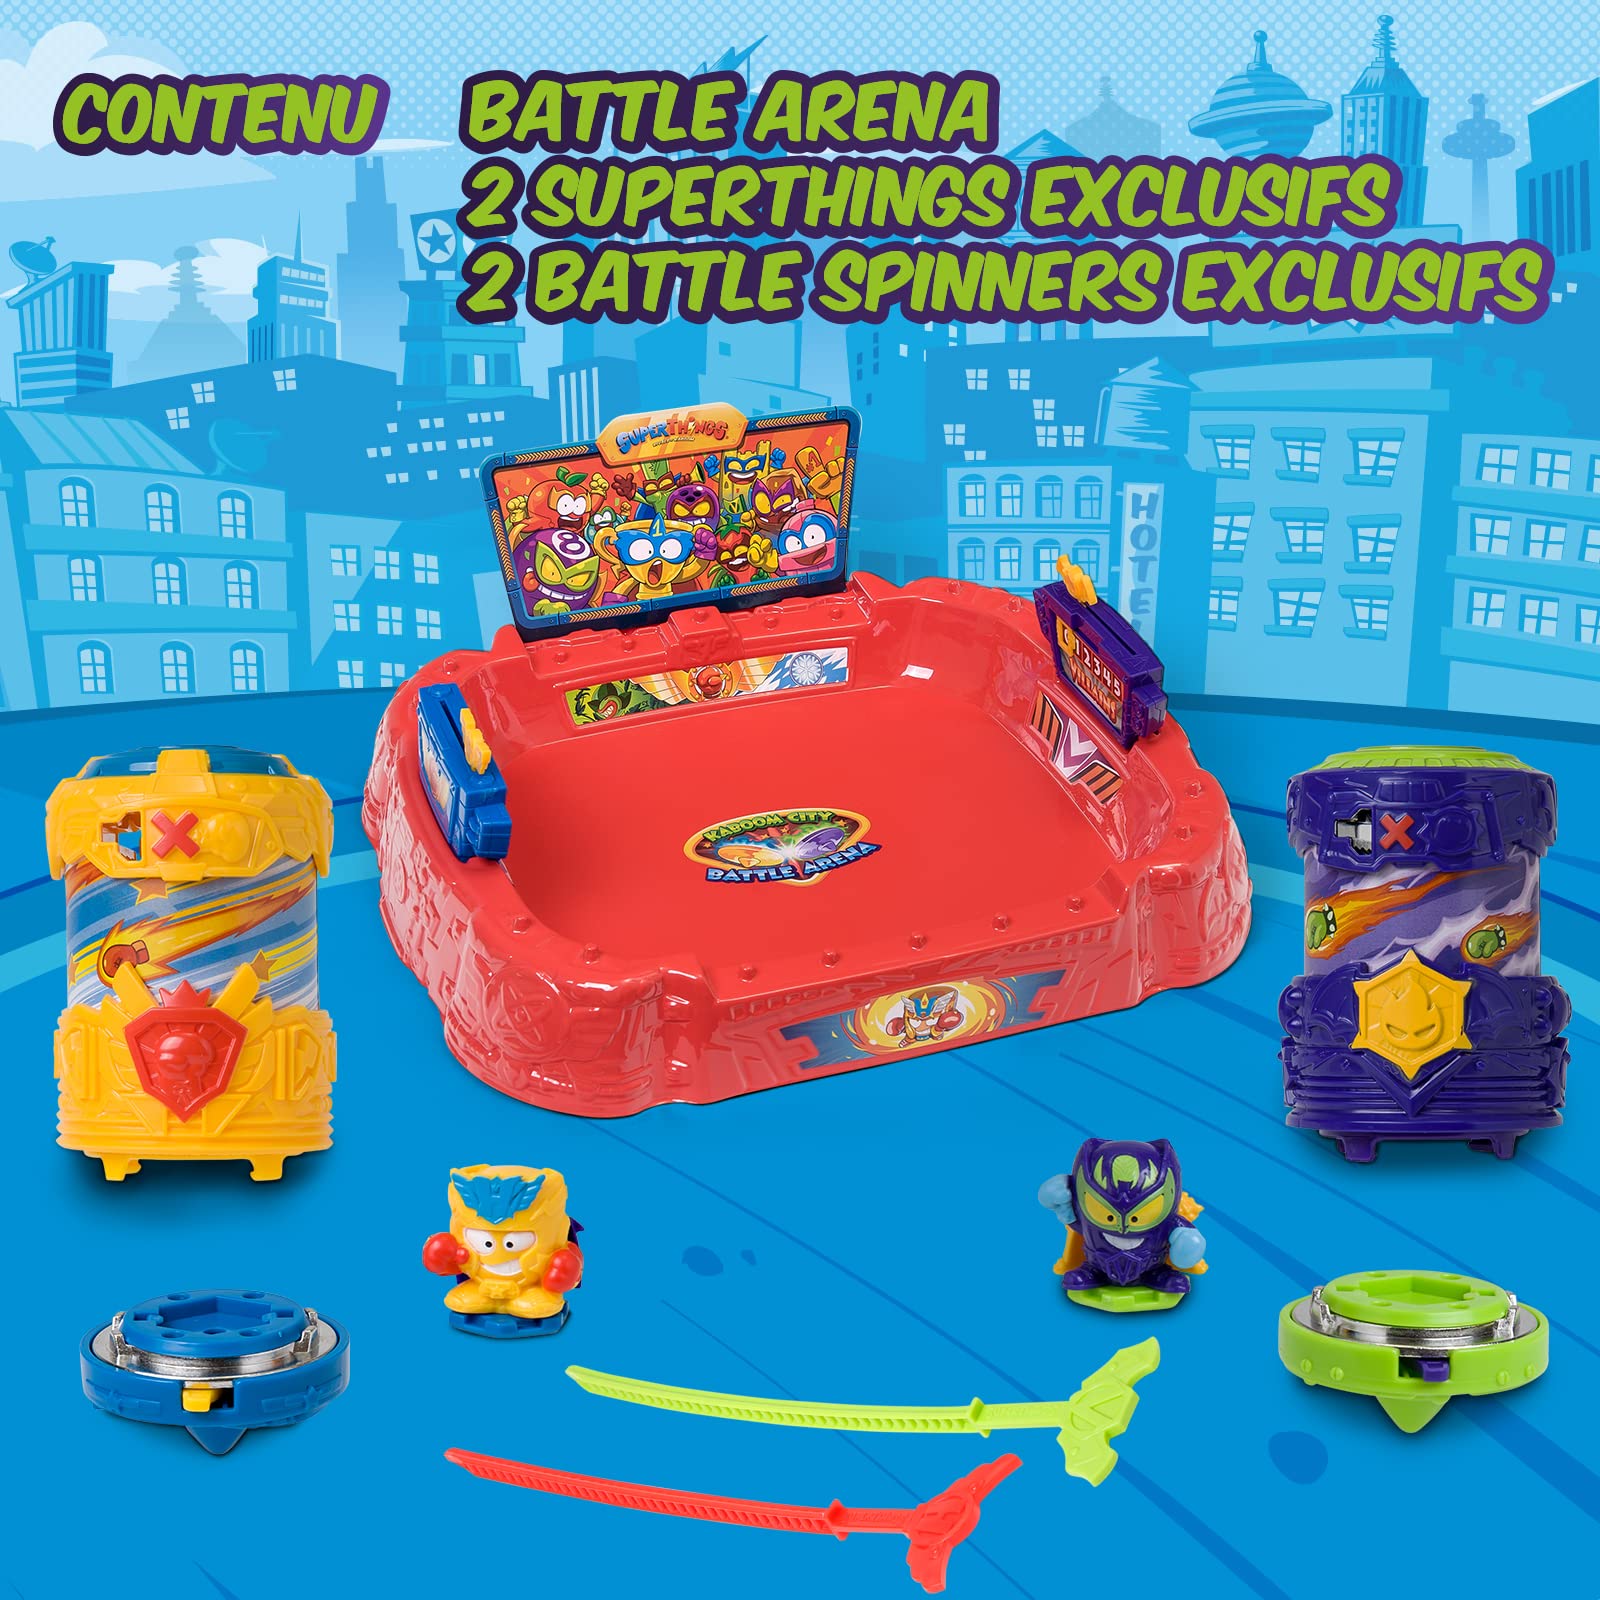 SUPERTHINGS Battle Arena – Contains 1 Arena, 2 Exclusive Battle Spinners & 2 Exclusive SuperThings